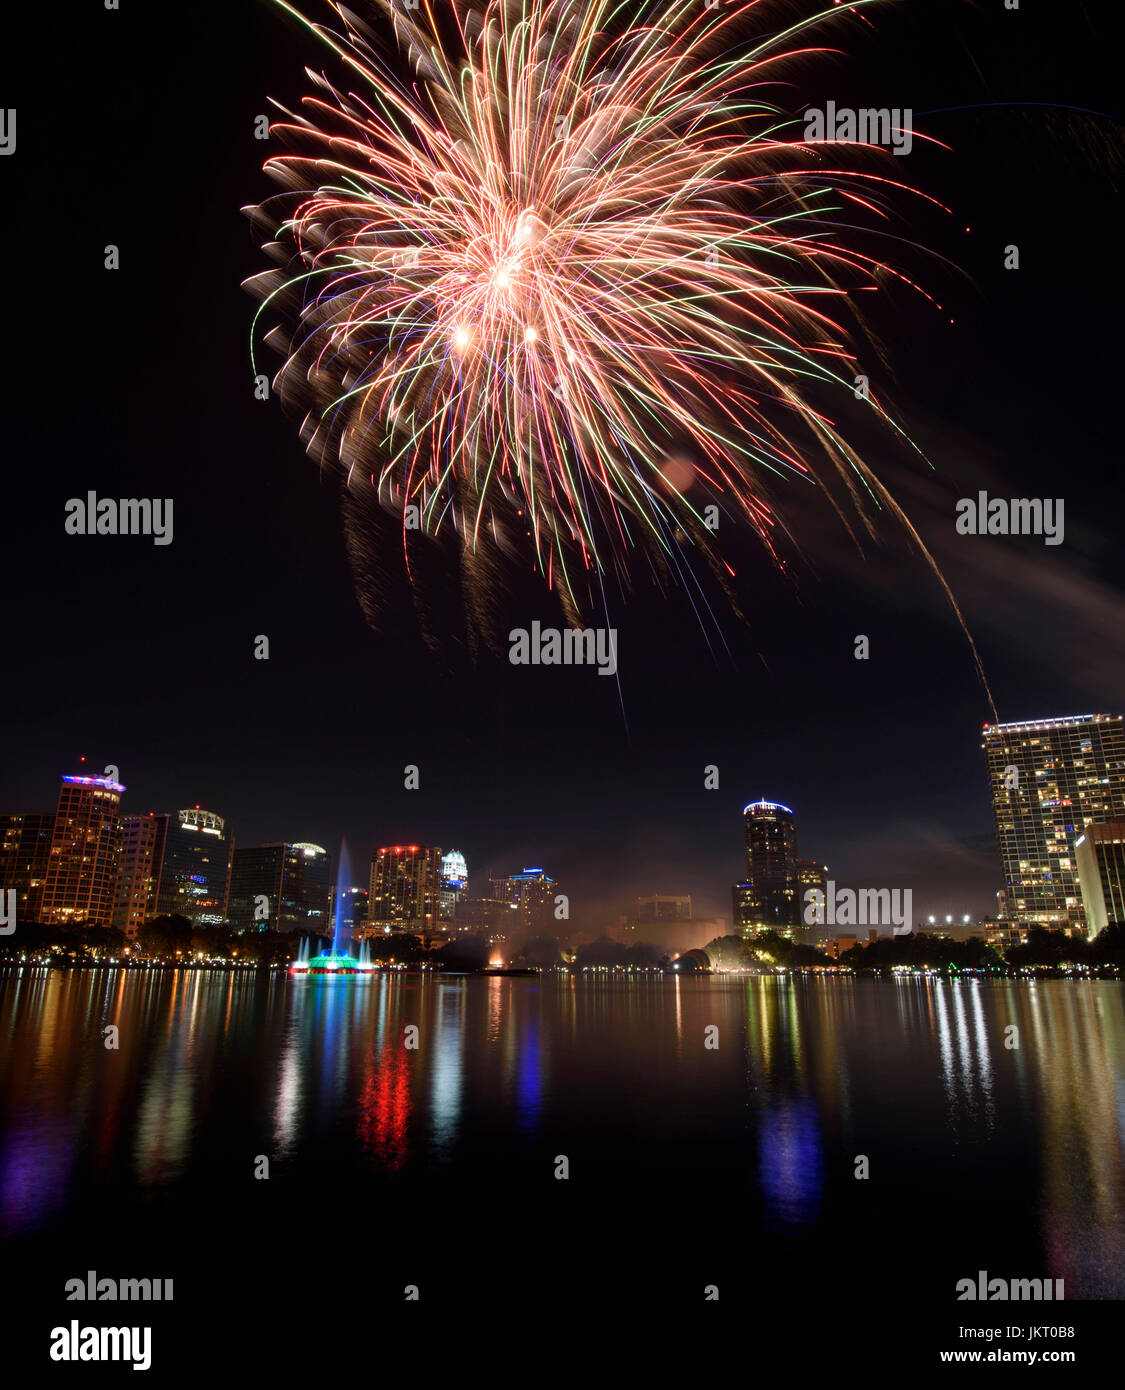 Fourth of July fireworks at Lake Eola Park in downtown Orlando, Florida